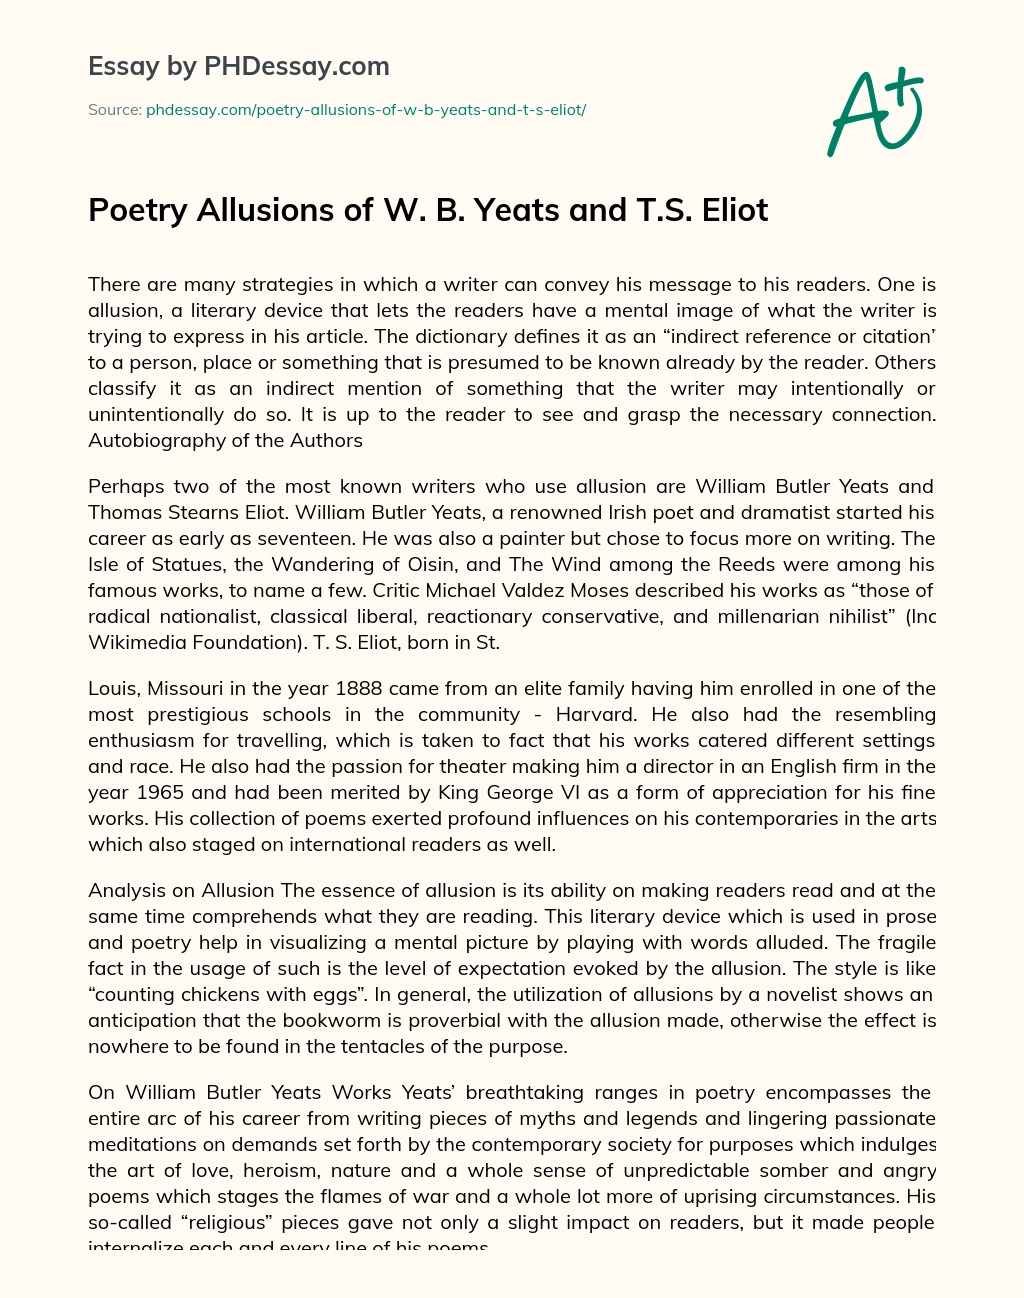 Poetry Allusions of  W. B. Yeats and T.S. Eliot essay